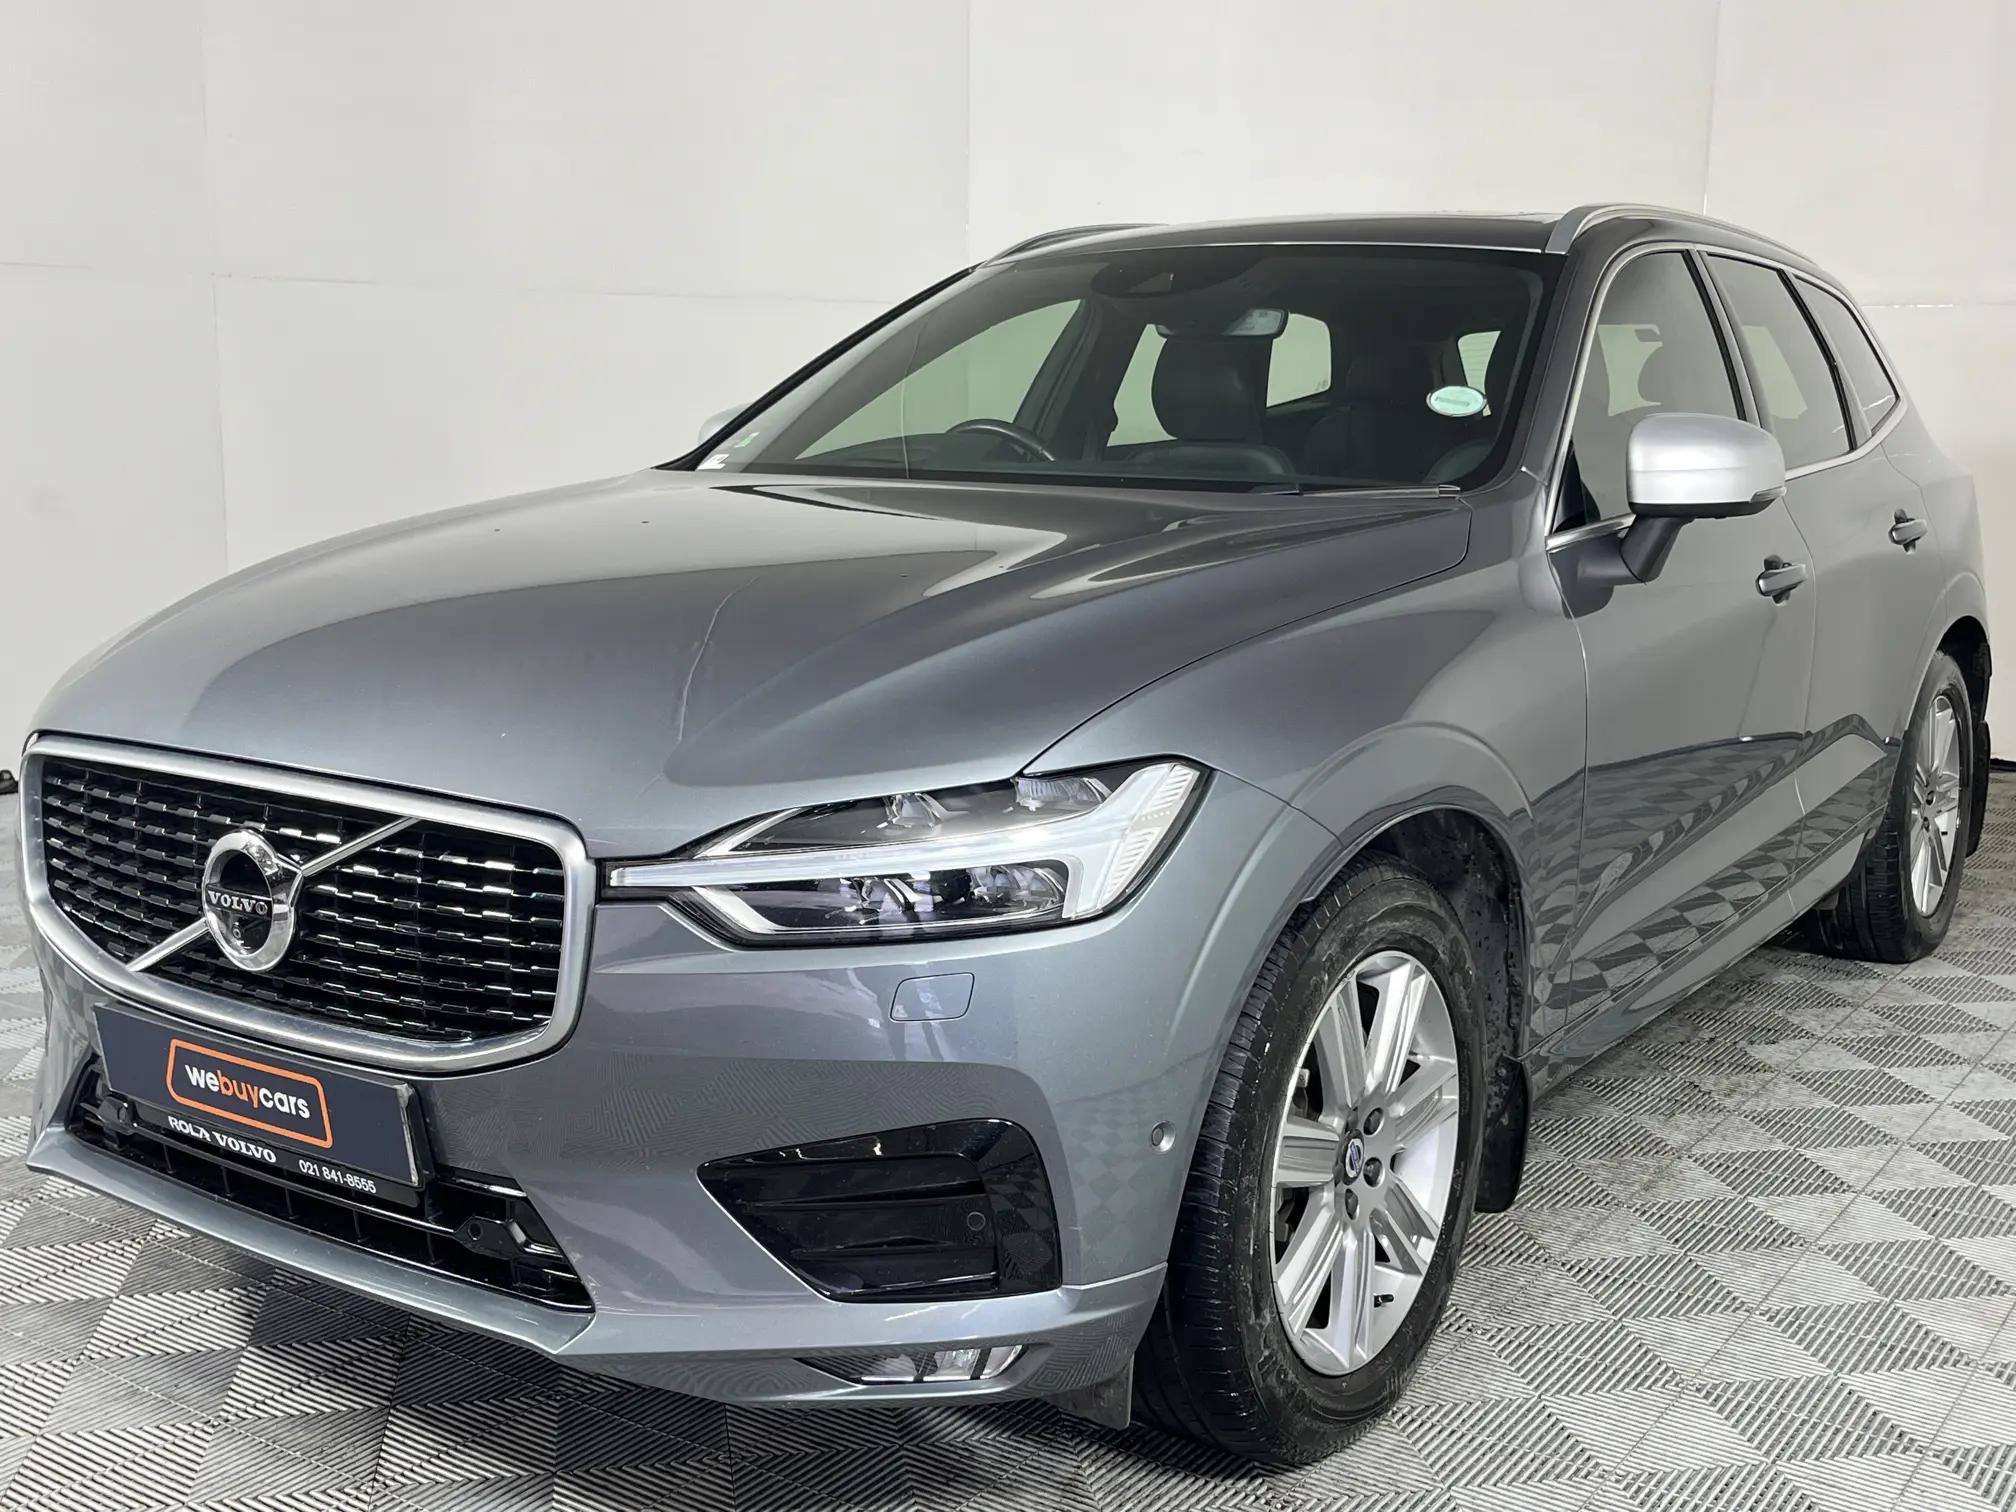 Volvo XC60 D4 (140kW) R-Design Geartronic AWD